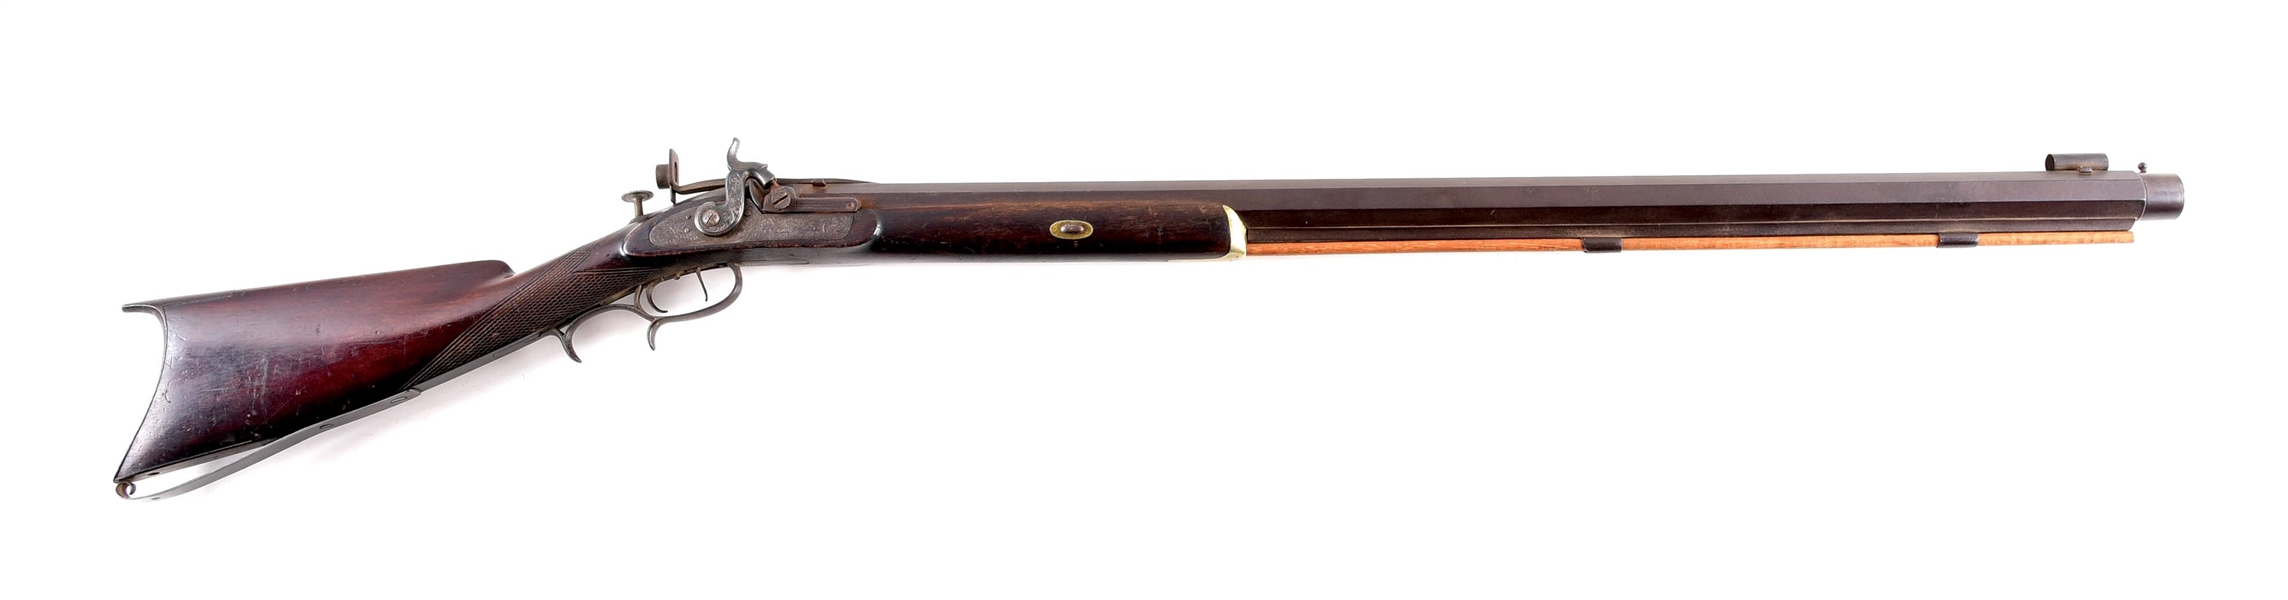 (A) N. DELANY PERCUSSION TARGET RIFLE.